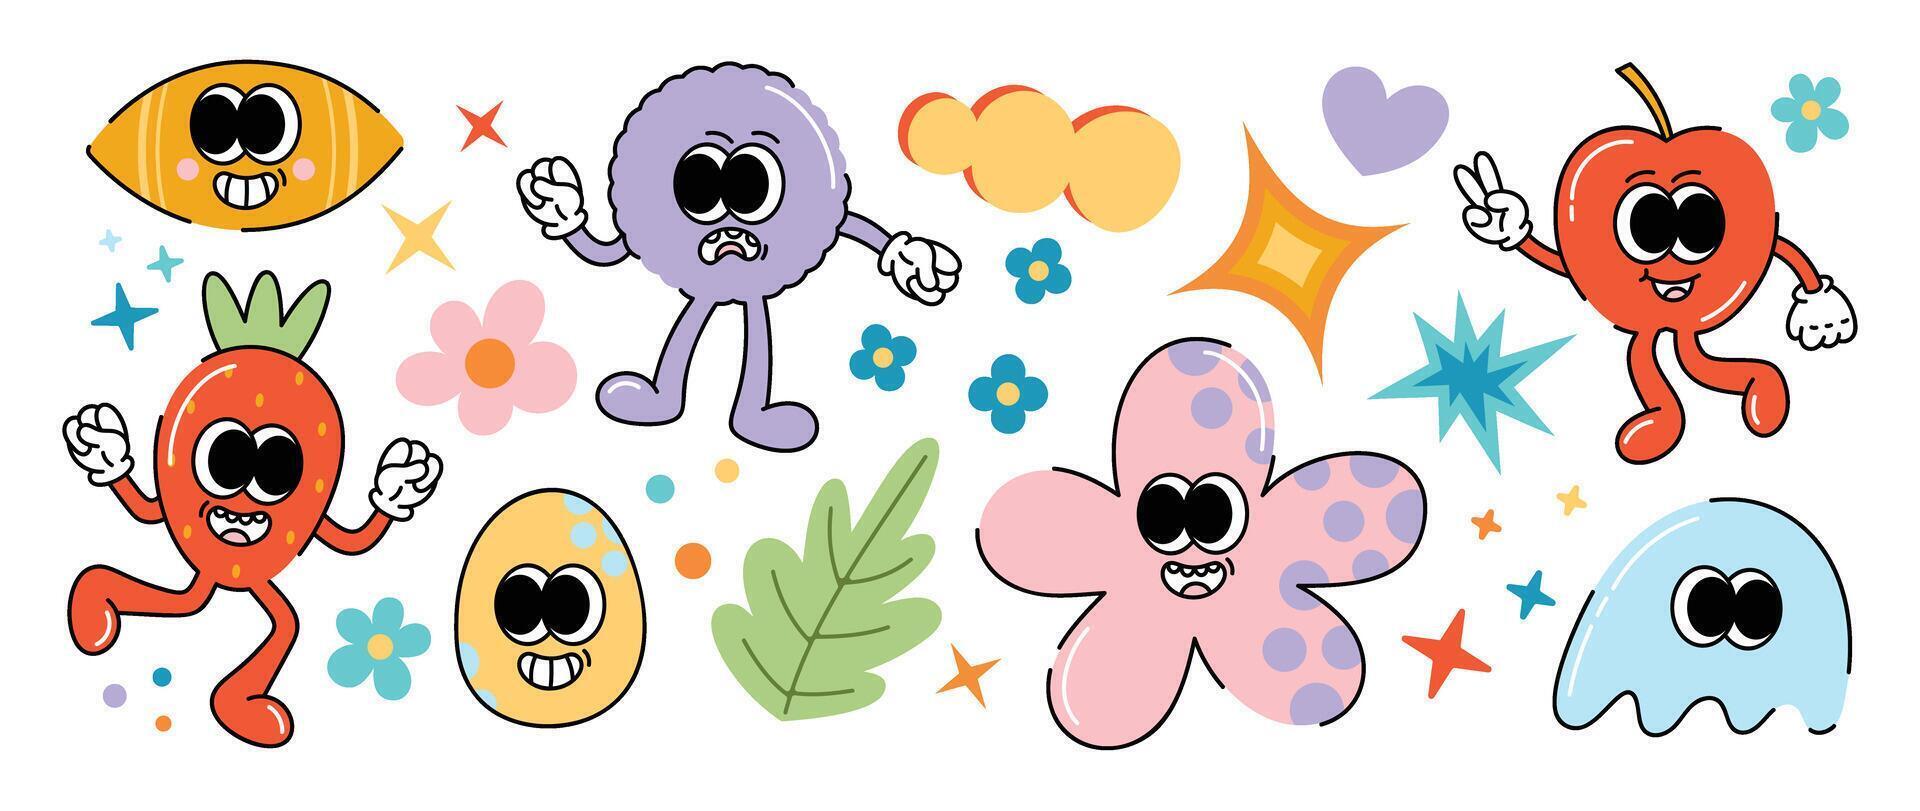 Set of funky groovy element vector. Collection of cartoon characters, doodle smile face, flower, apple, strawberry, egg. Cute retro groovy hippie design for decorative, sticker, kids, clipart. vector